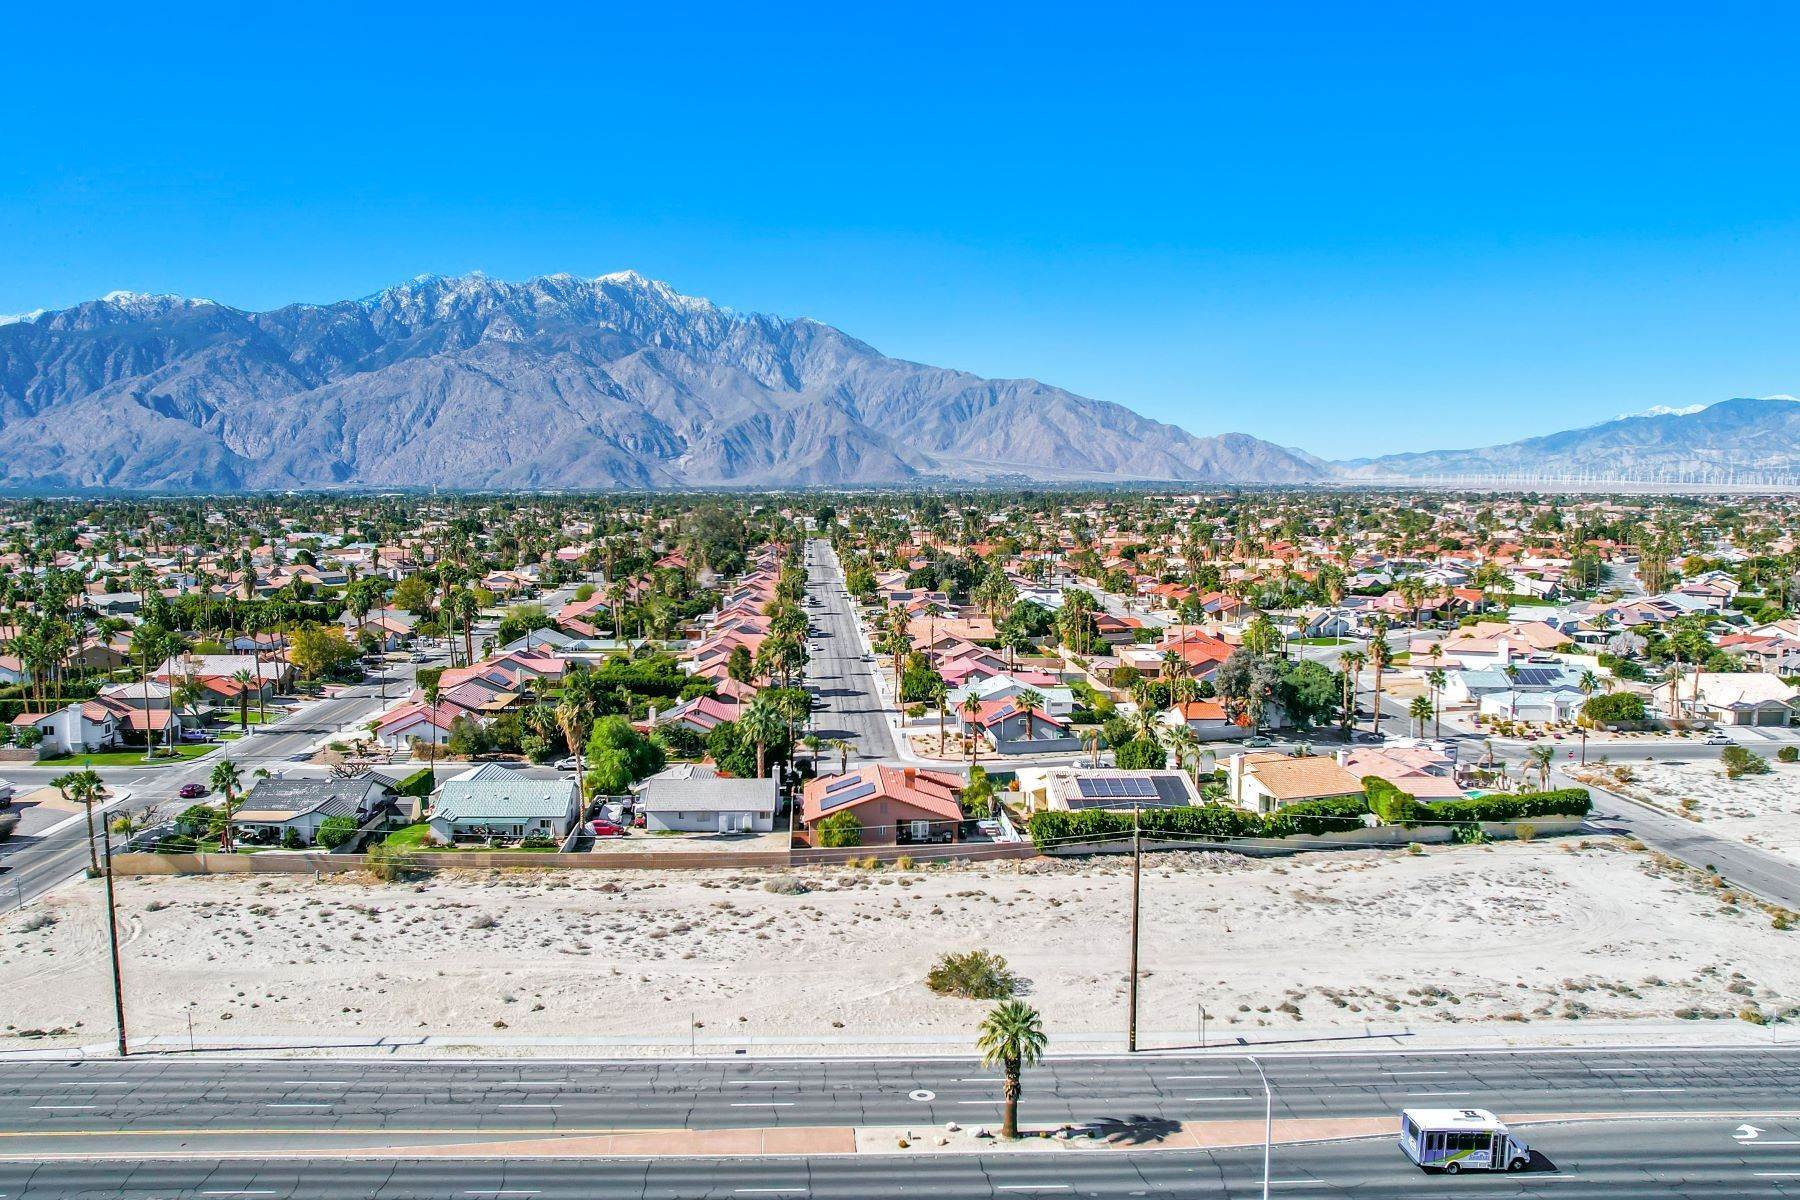 Land for Sale at Date Palm Drive, Cathedral City, CA, 92234 Date Palm Drive Cathedral City, California 92234 United States